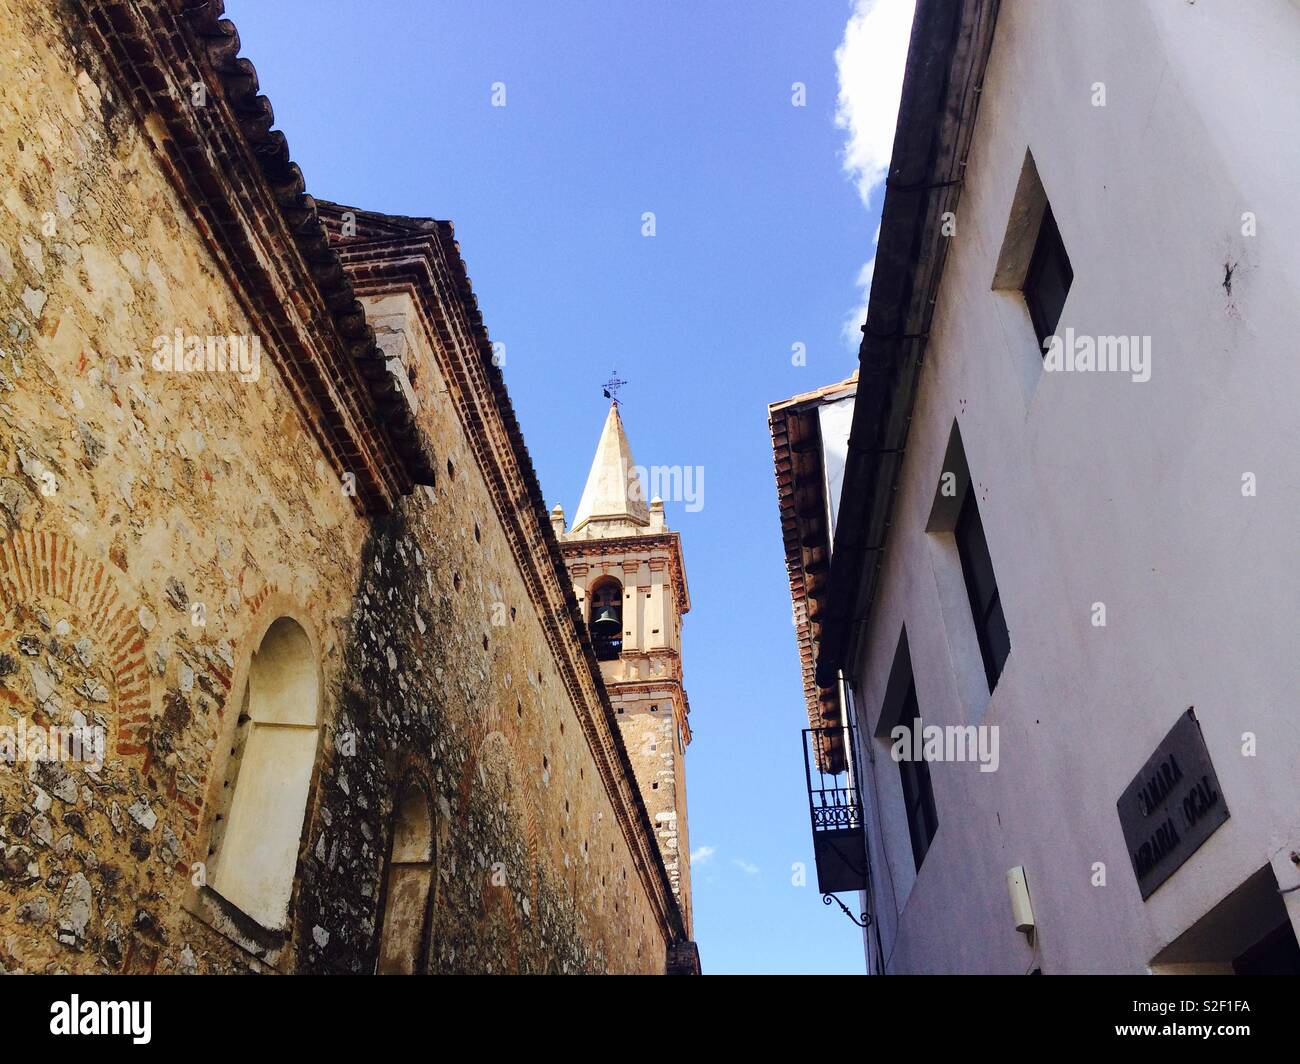 Looking up between two high walls in an alleyway a church steeple peeps through in a village in Andalucia Spain Stock Photo